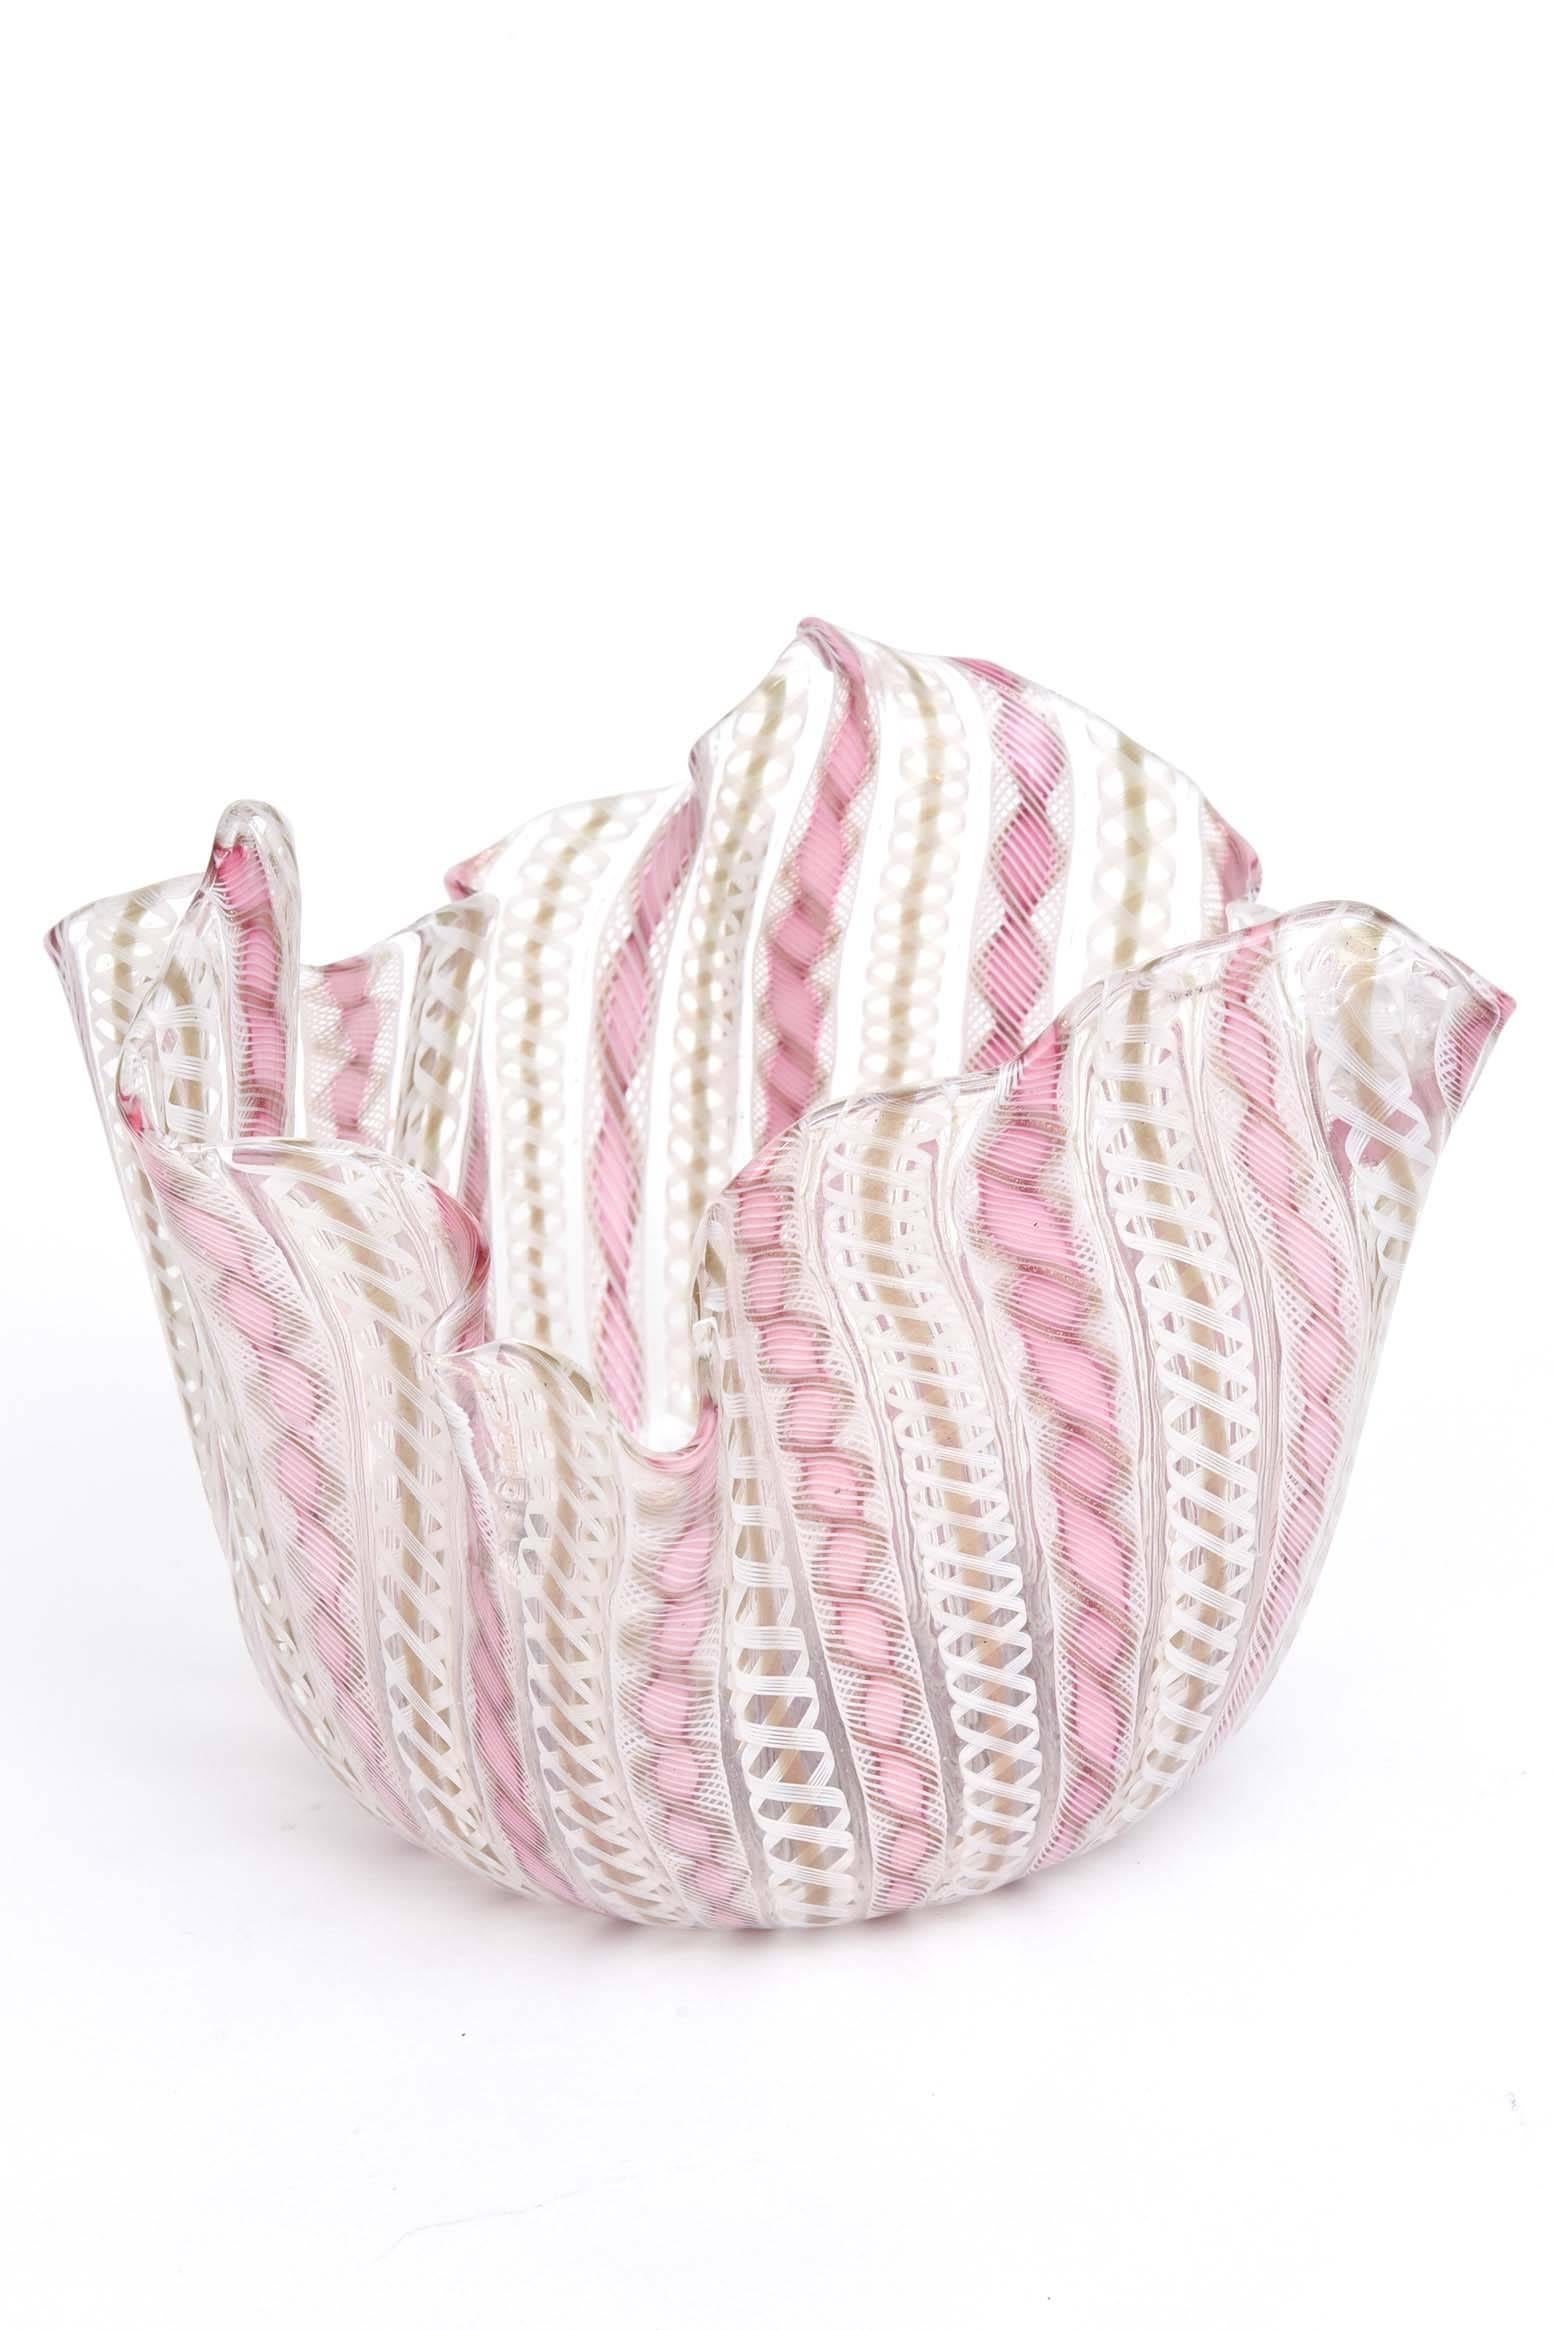 A Classic piece of Mid-Century Modern mouth blown glass from the Isle of Murano. A pretty pink and white striped confection with hand pinched sides and undulating top. A perfect piece for a side table or guest bedroom. In wonderful vintage condition.